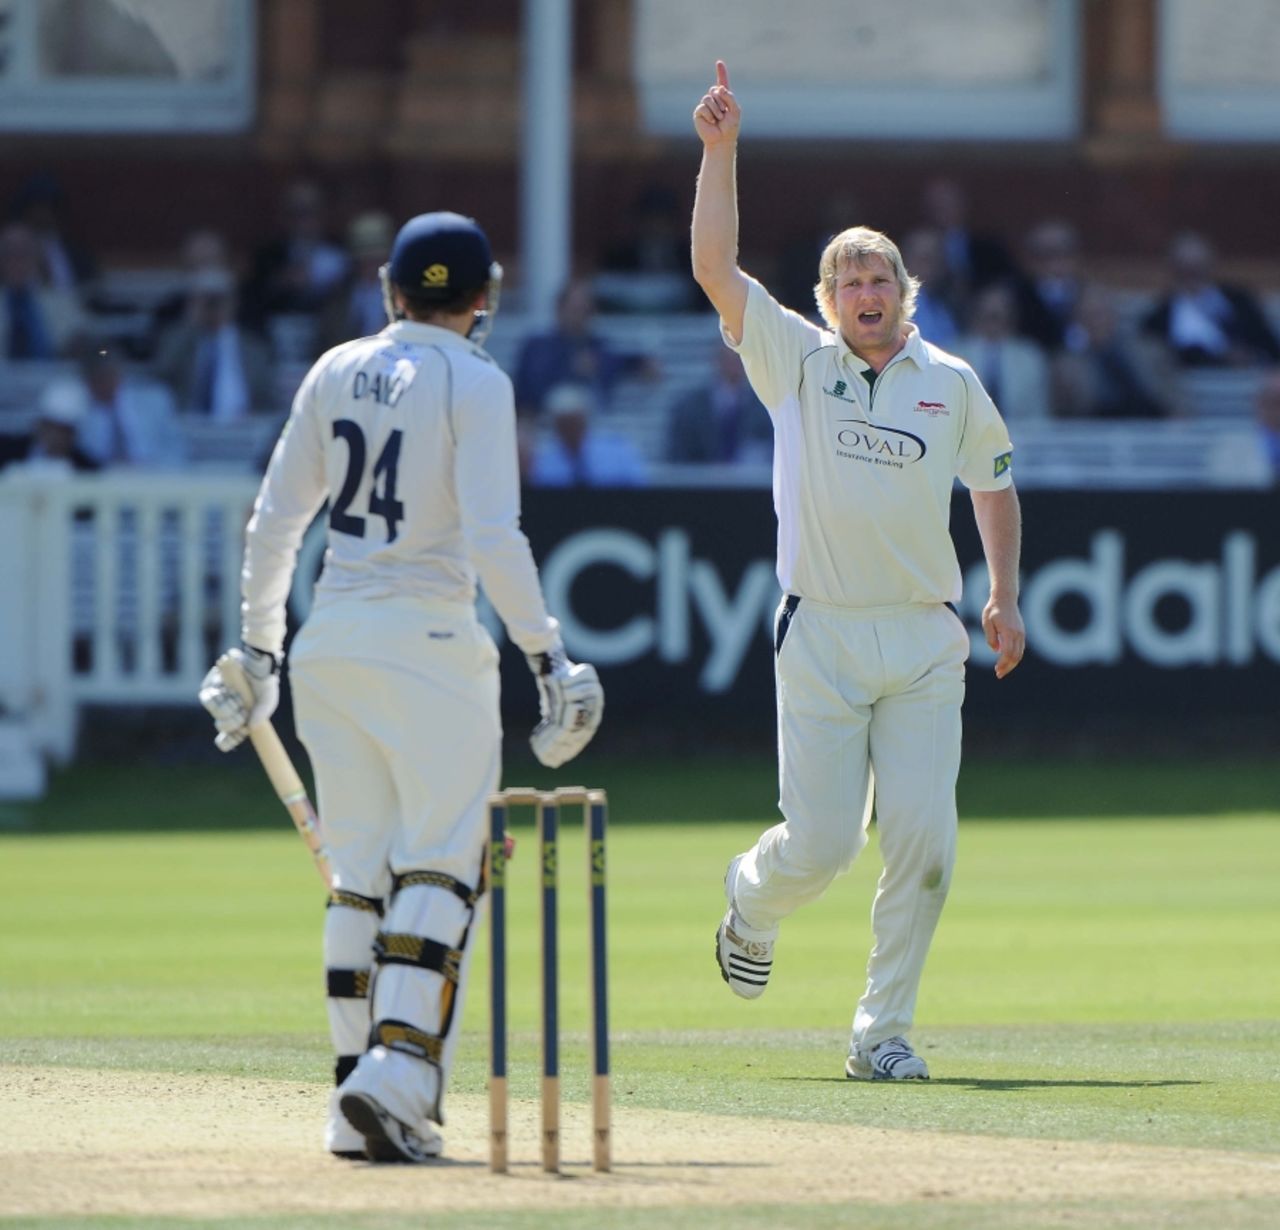 Matthew Hoggard celebrates Josh Davey's dismissal at Lord's, Middlesex v Leicestershire, County Championship Division Two, Lord's, August 9 2010